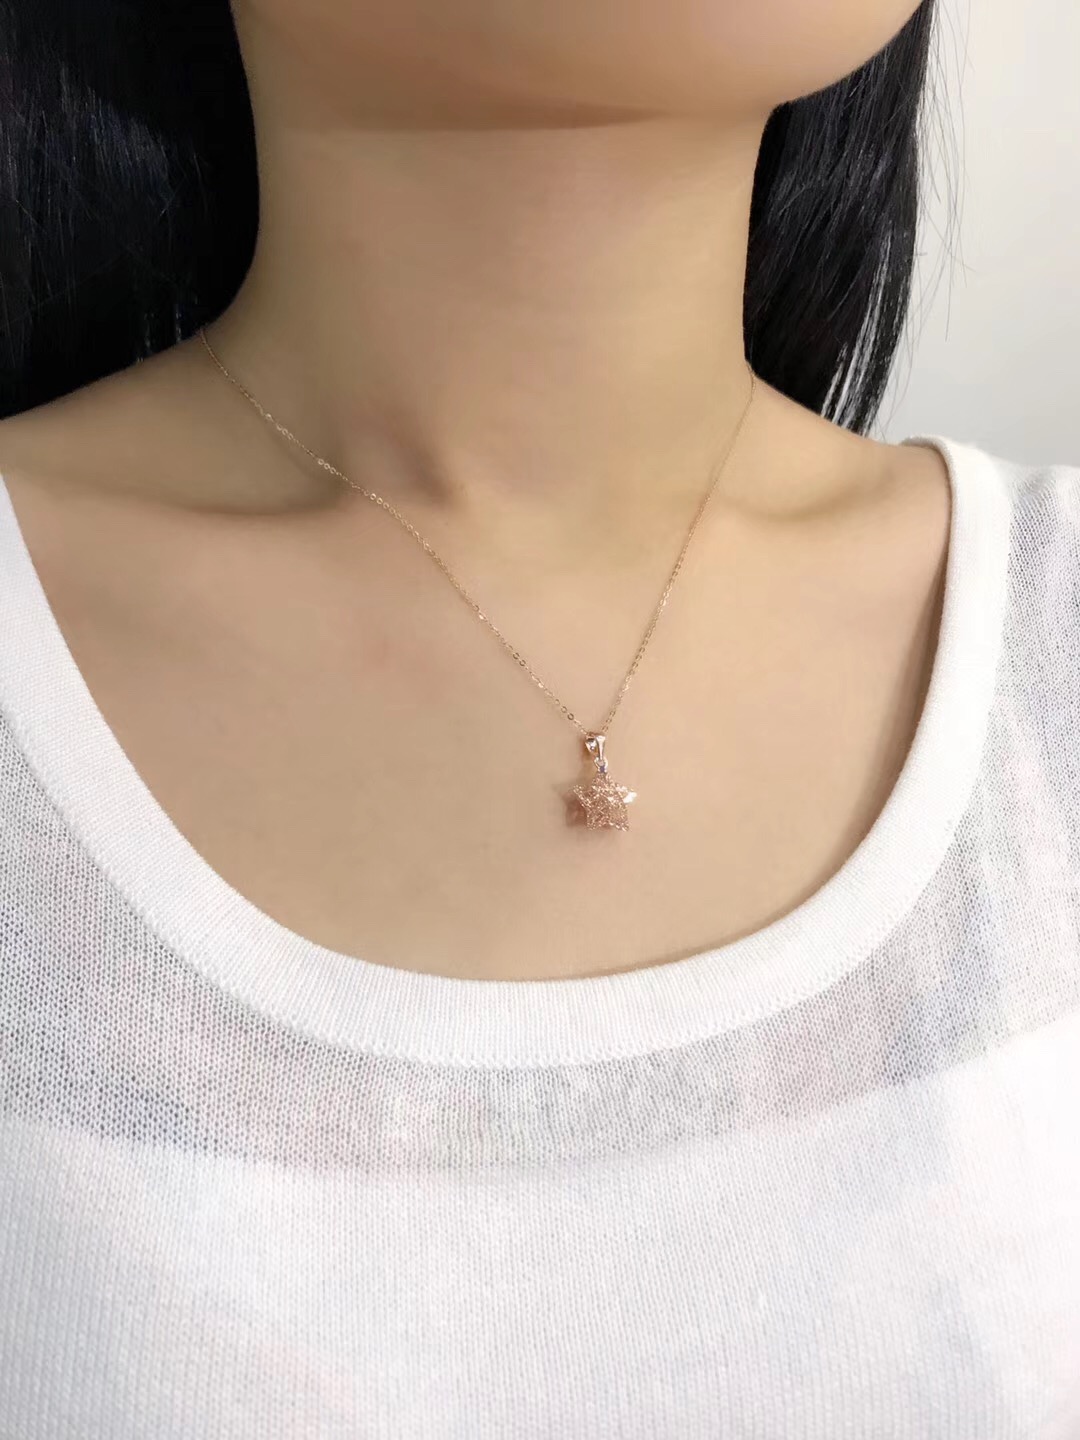 A00020 Star Shaped Necklace in 18k Yellow Gold/18k Rose Gold